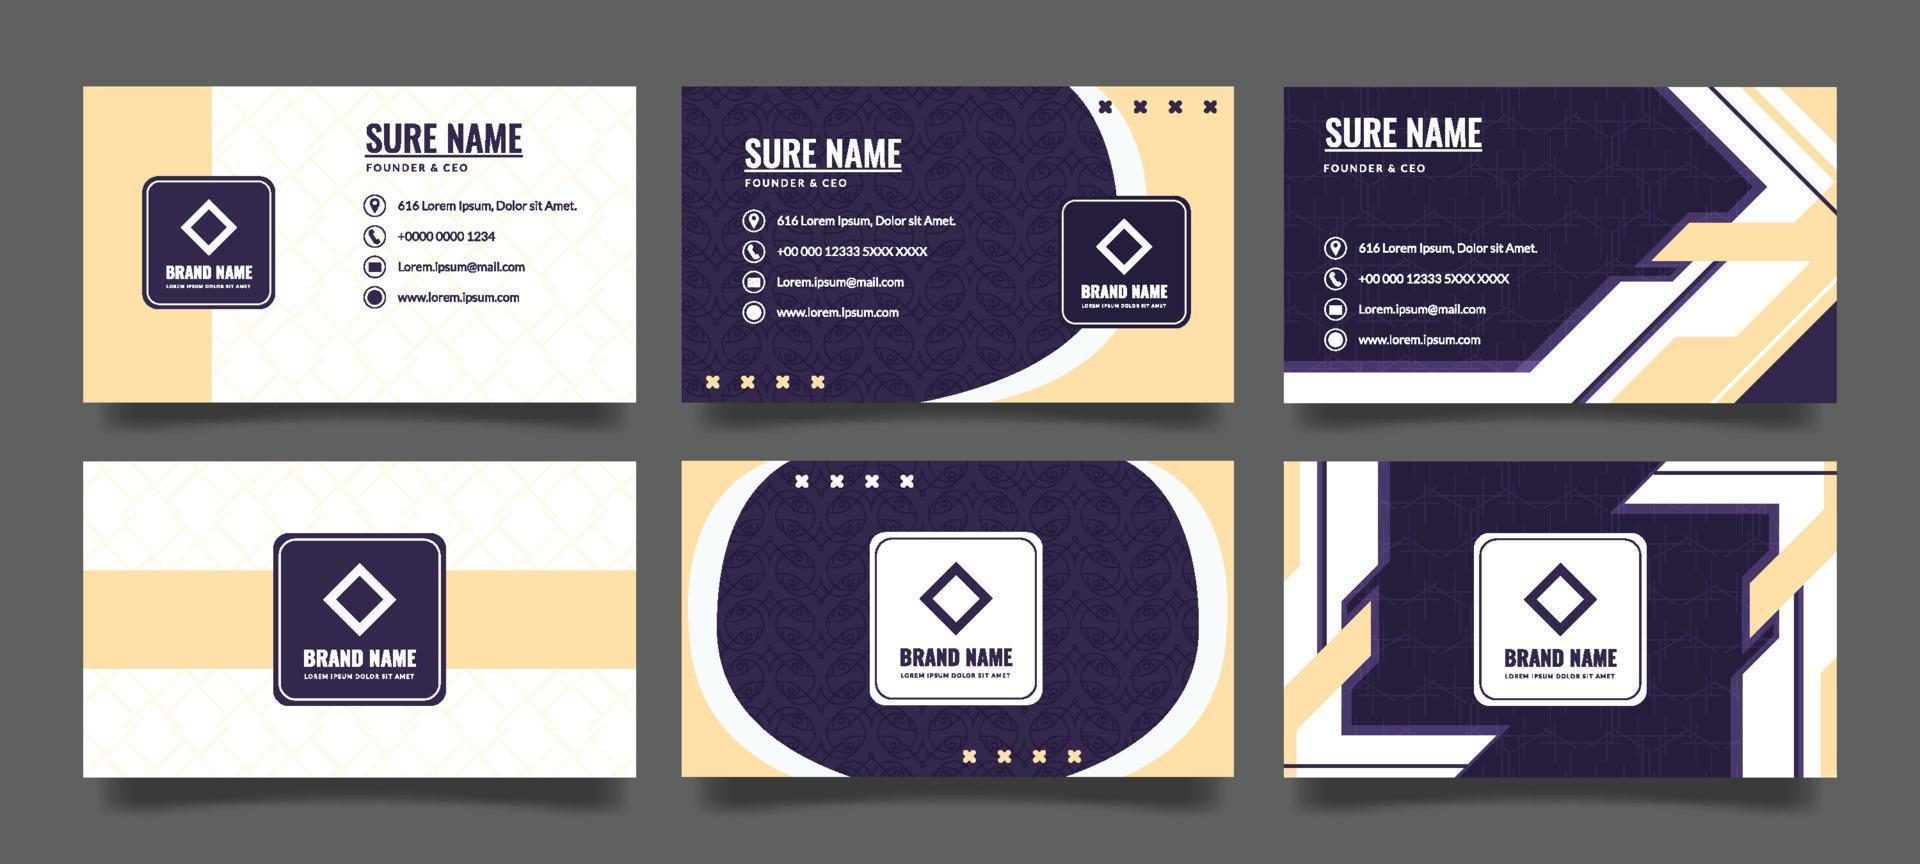 Business Card Formal Office Template vector